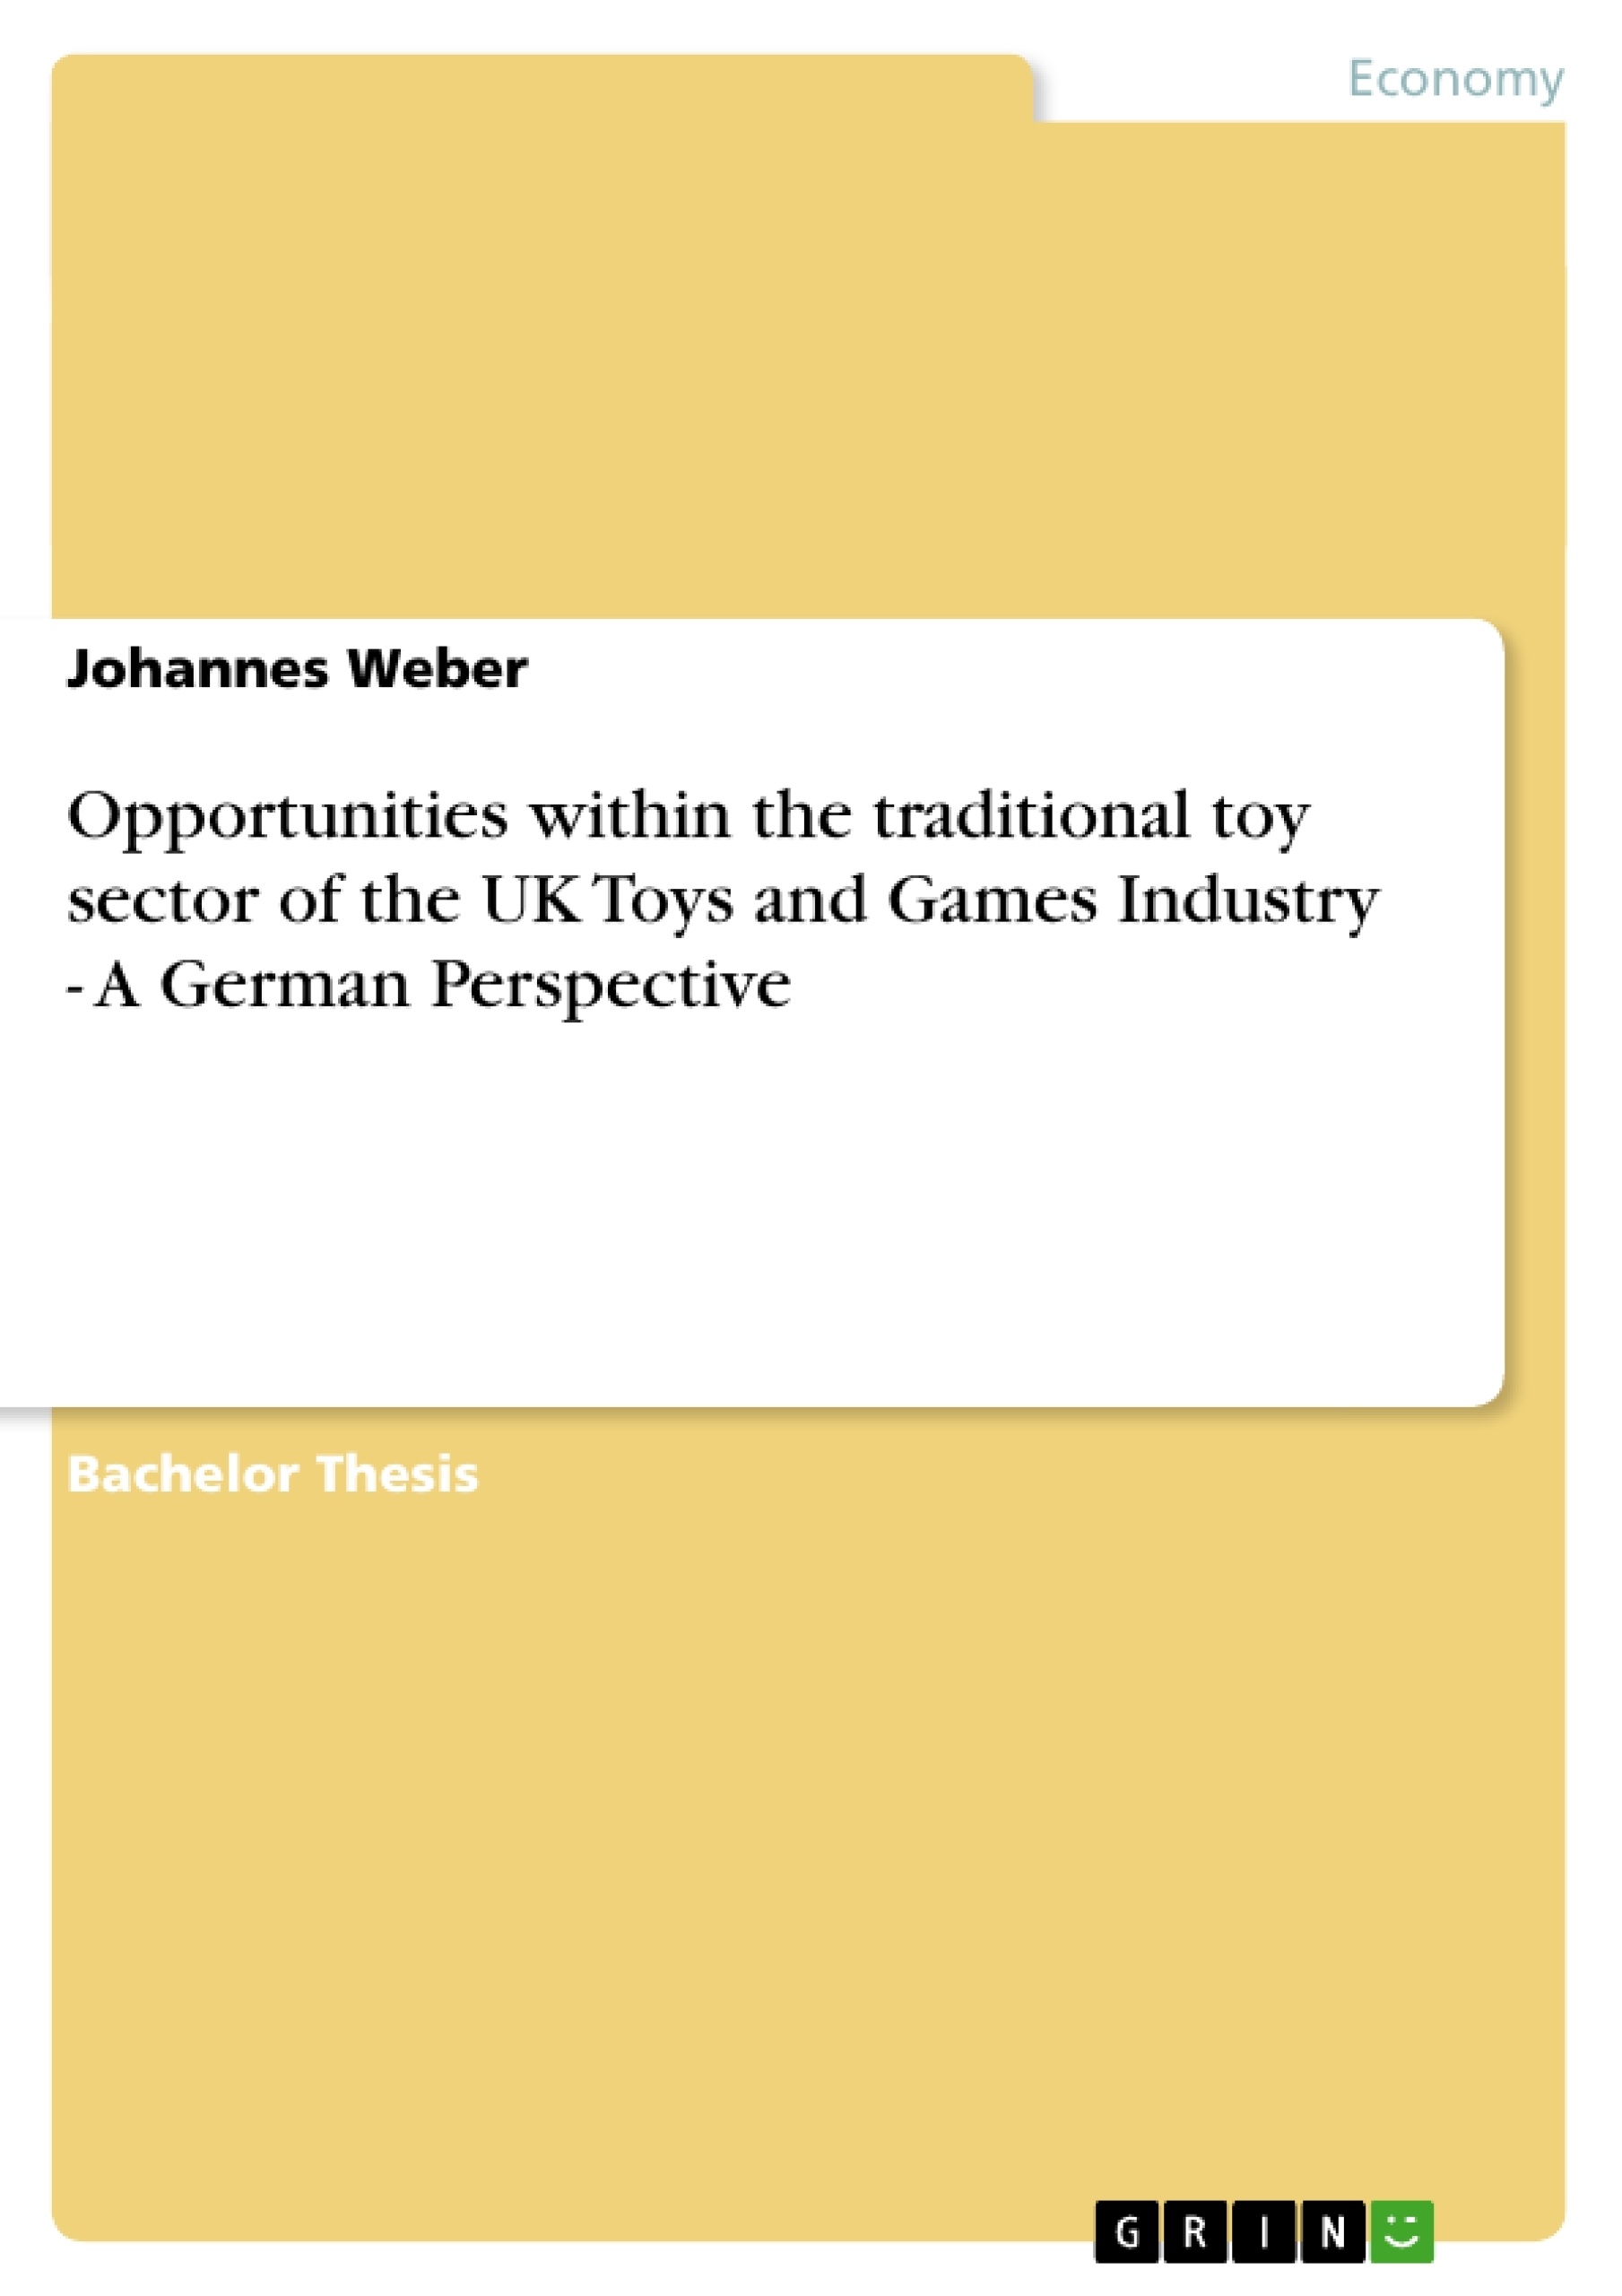 Title: Opportunities within the traditional toy sector of the UK Toys and Games Industry - A German Perspective